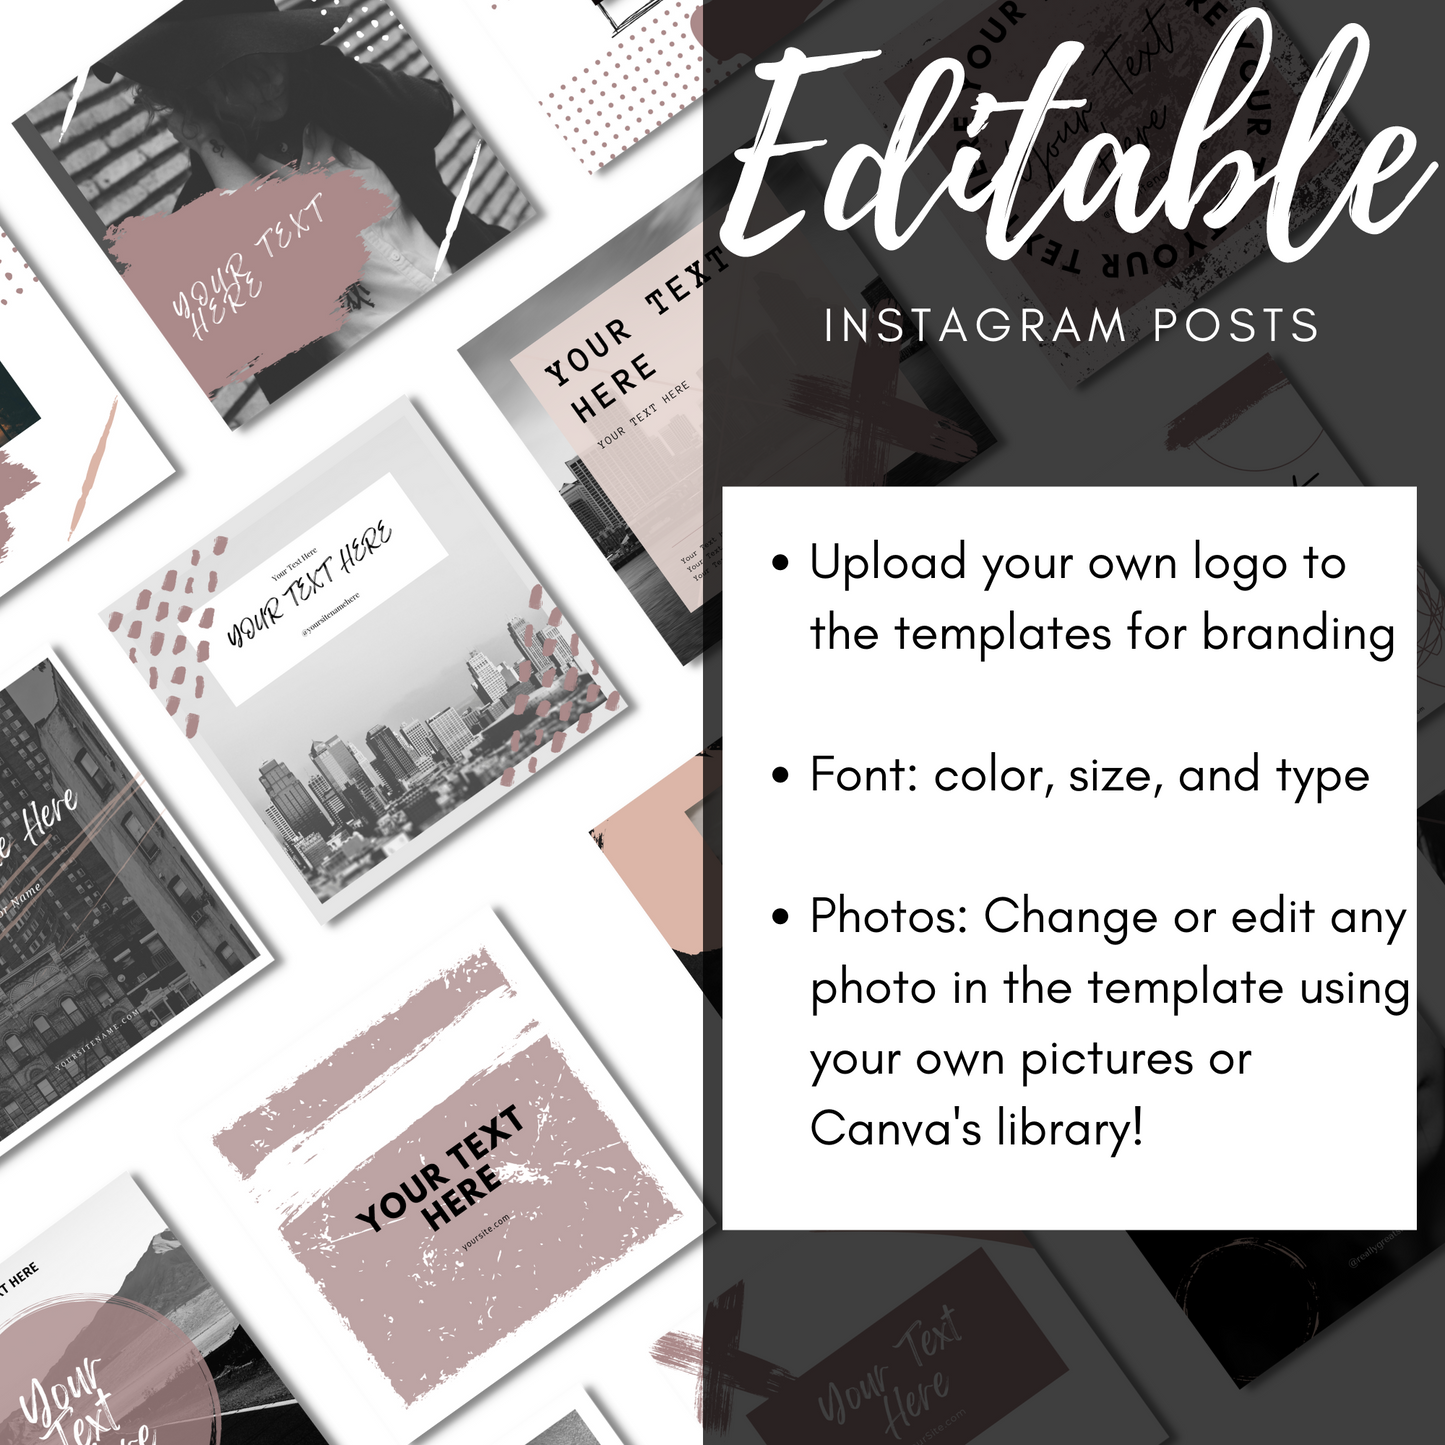 20 Black and Blush Instagram Post Templates | Editable in Canva | Social Media Branding | Valentines | Instant Download